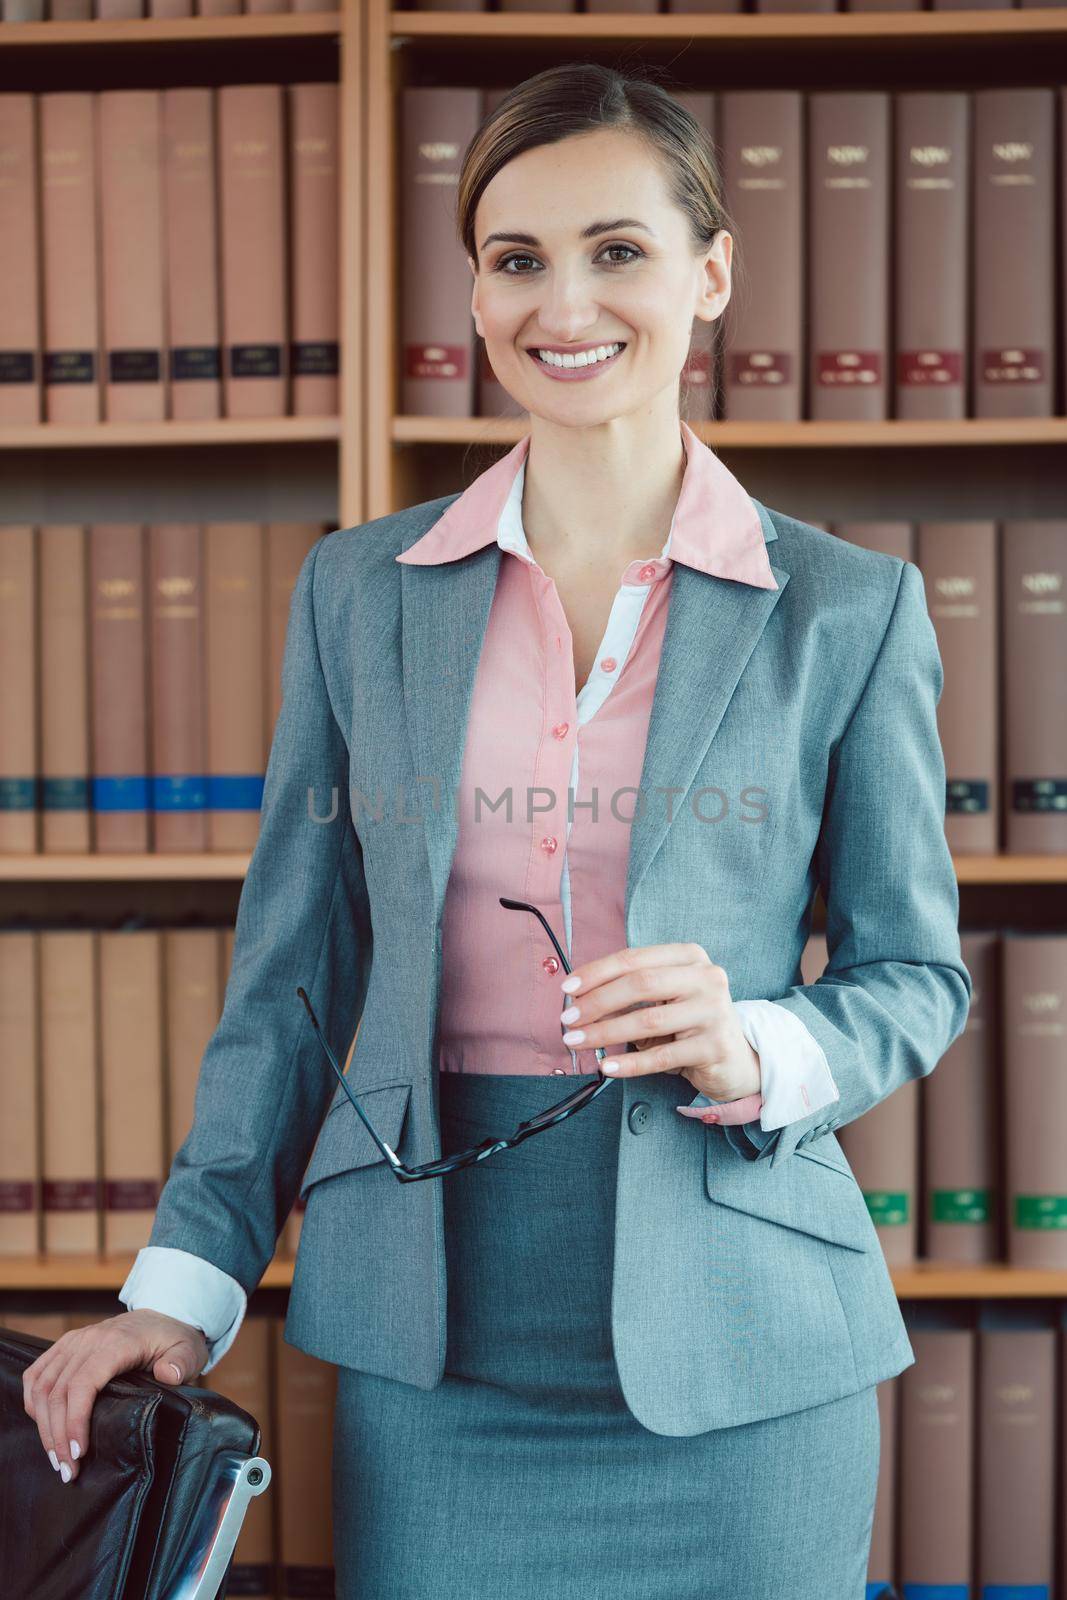 Attorney at law in her office in front of book shelf by Kzenon